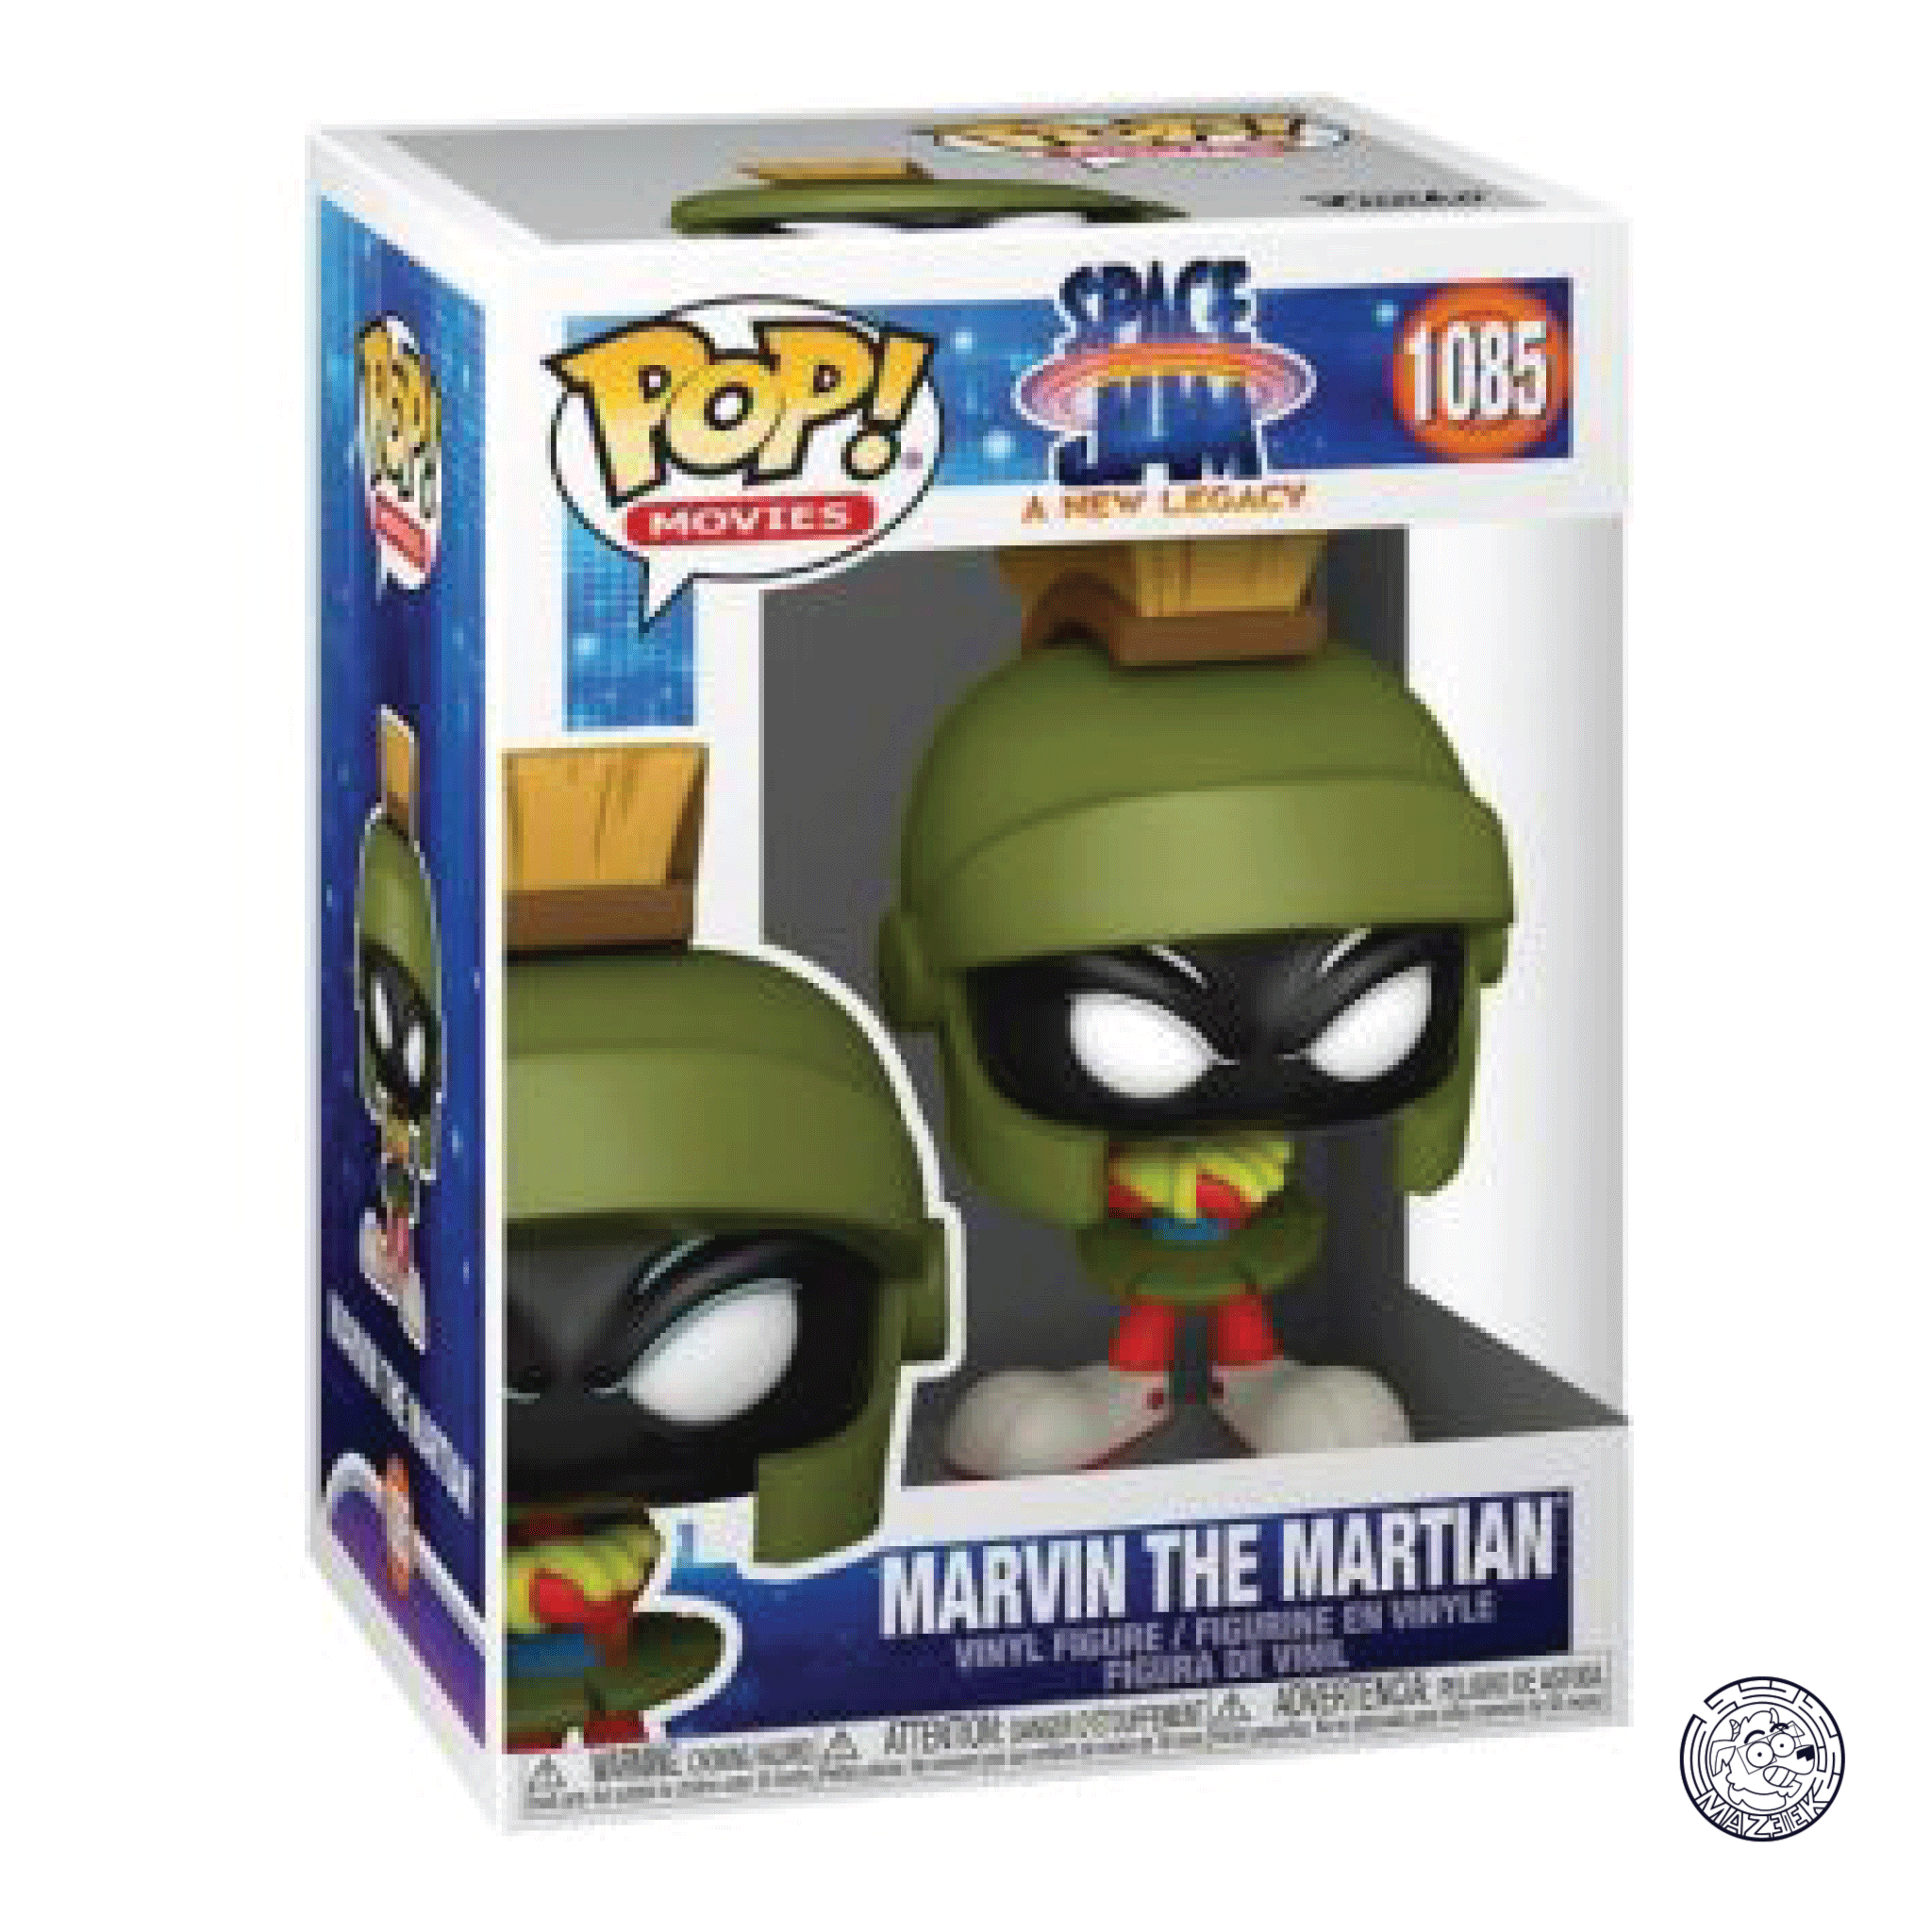 Funko POP! Space Jam a new Legacy: Marvin the Martian 1085